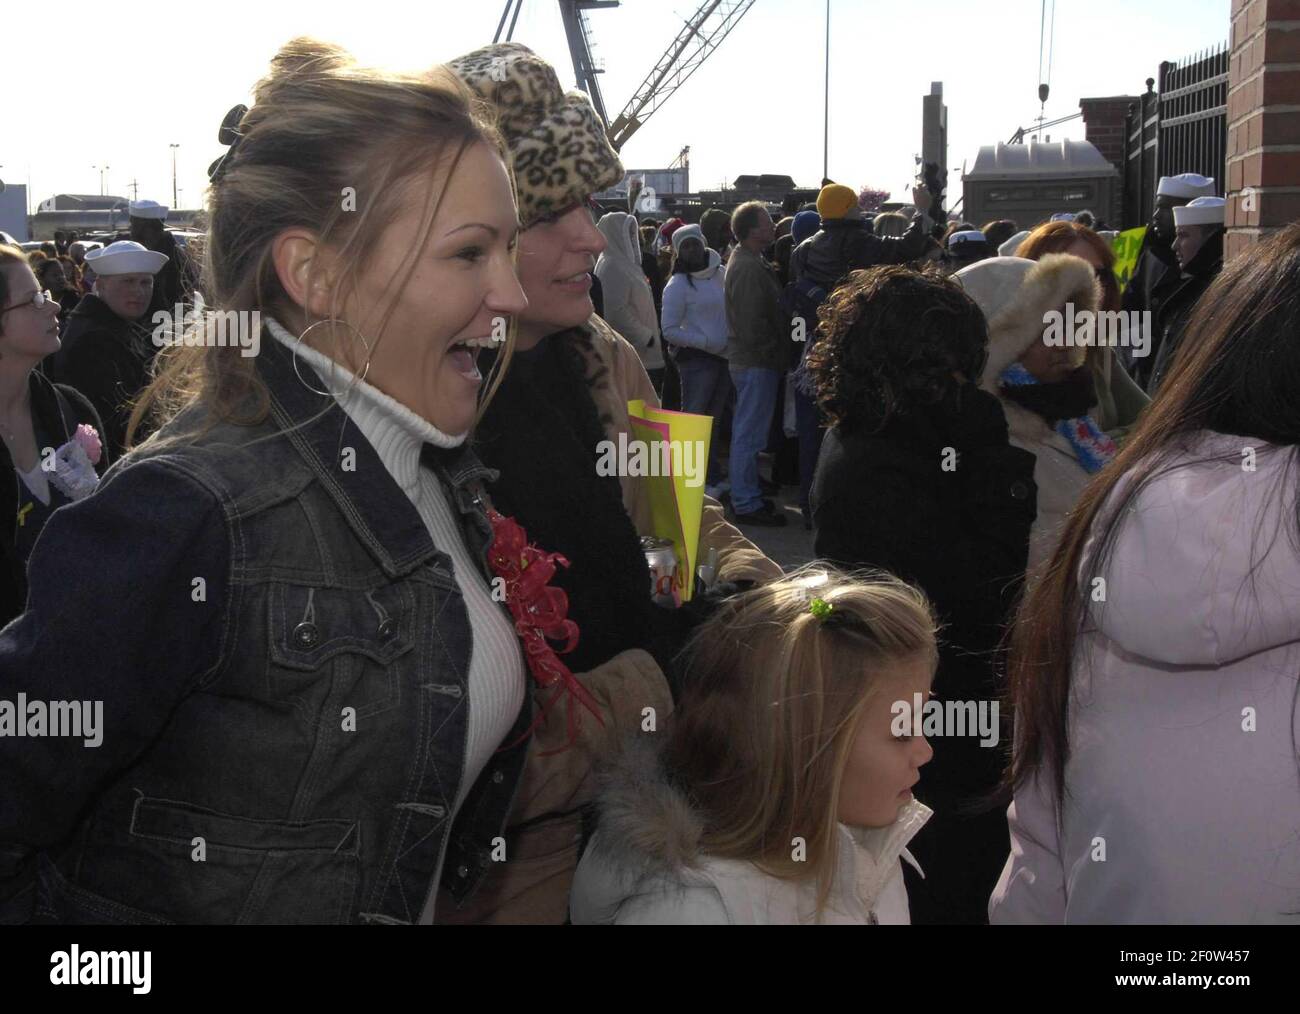 19 December 2007 - Norfolk, Virginia - Family members wait patiently as the guided-missile destroyer USS Arleigh Burke (DDG 51) returns to Naval Station Norfolk after a six-month deployment. Arleigh Burke, part of the Enterprise Carrier Strike Group, deployed to the 5th and 6th Fleet Areas of Responsibility to support theater security cooperation and maritime security operations. Photo Credit: Jon Dasbach/US Navy/Sipa Press/0712211441 Stock Photo